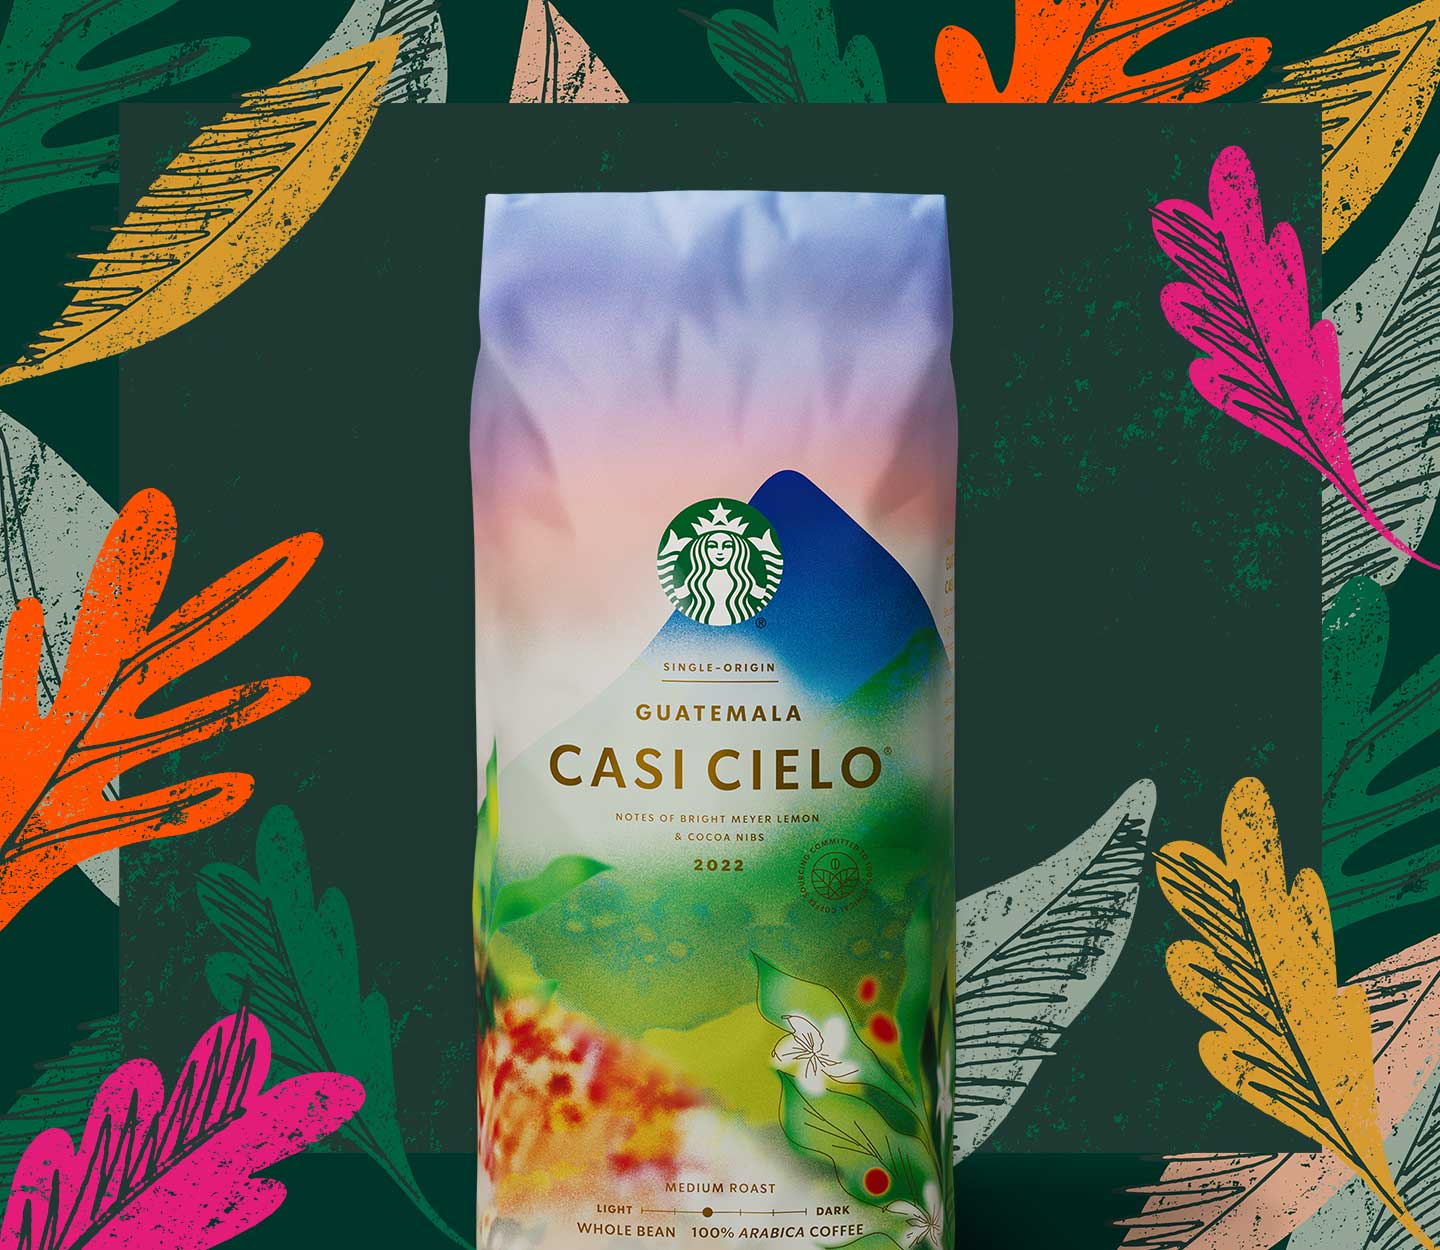 A coffee bag with a tropical, mountainous illustration surrounded by graphic leaves.